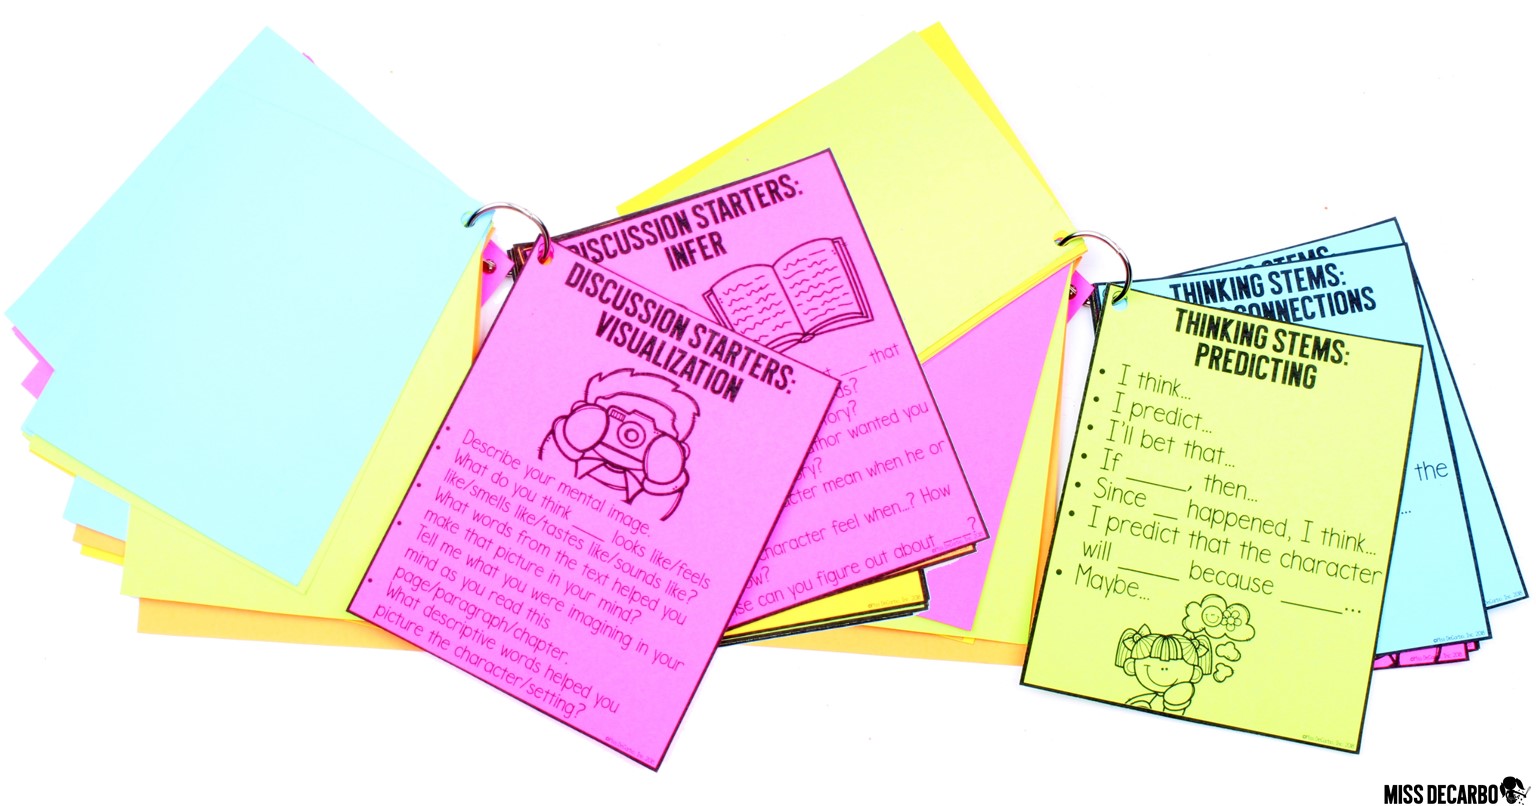 The reading reference ring contains discussion starters for various comprehension strategies that you can use during small group reading.